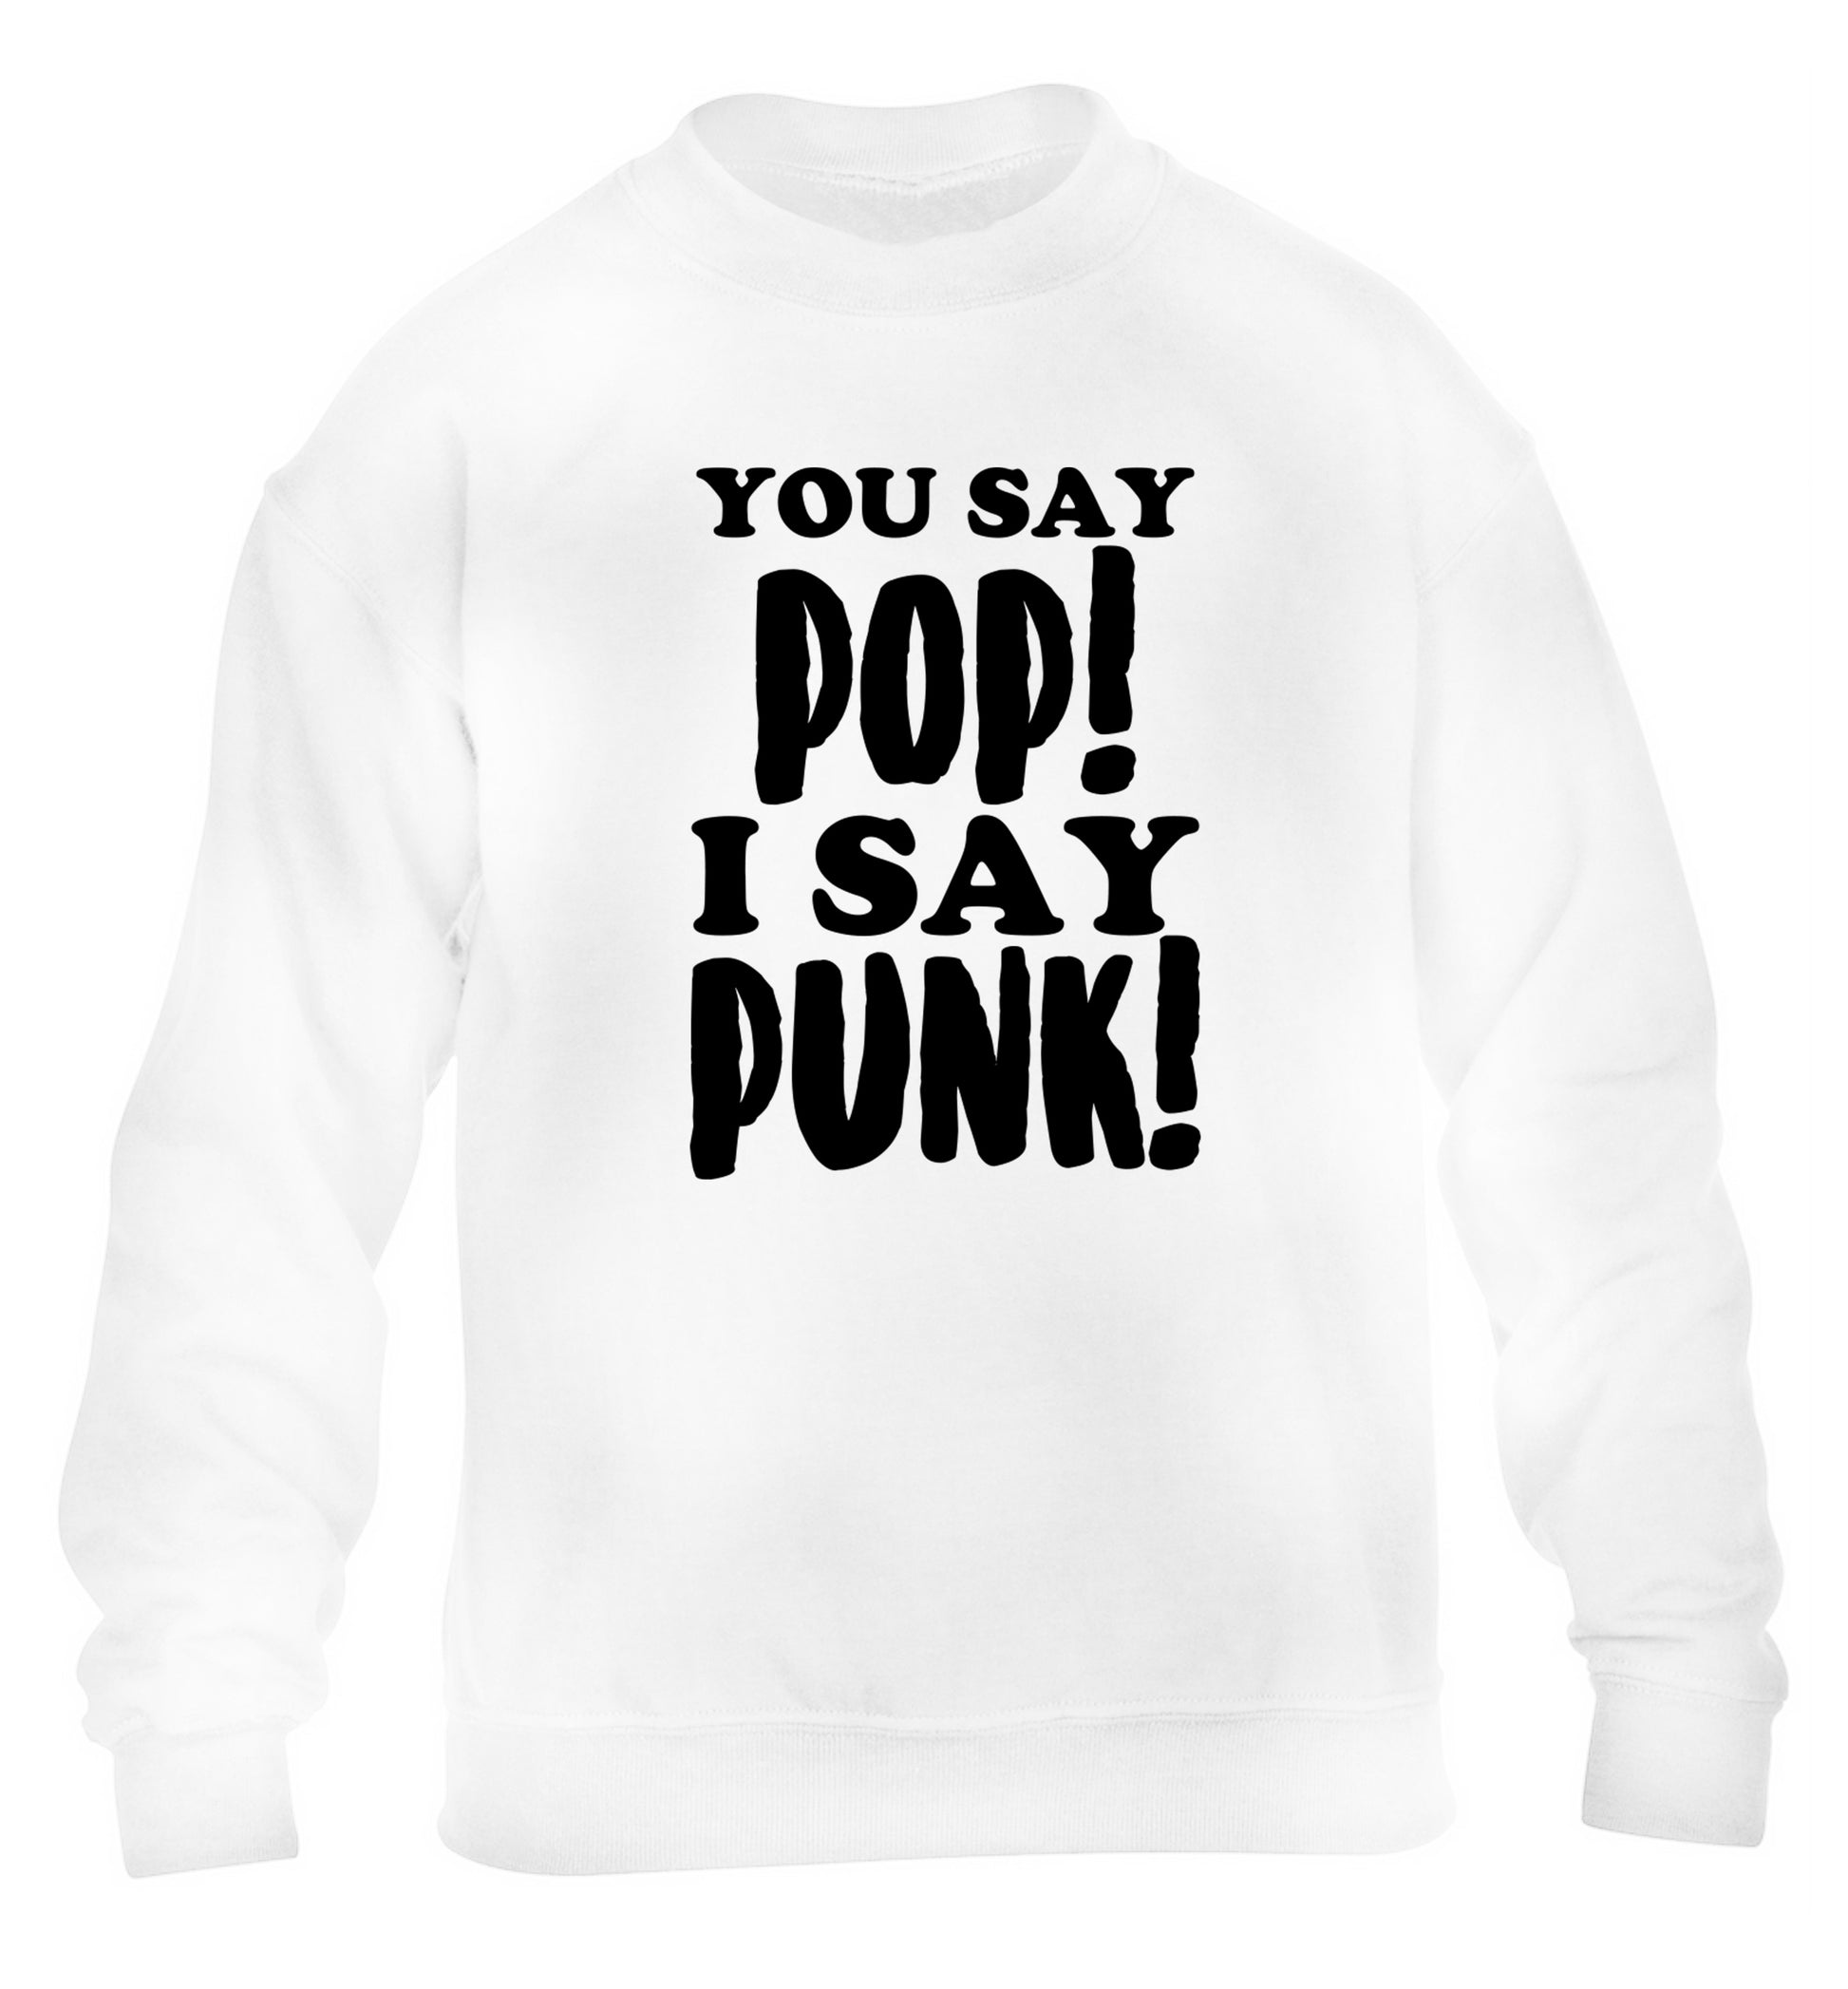 You say pop I say punk! children's white sweater 12-14 Years